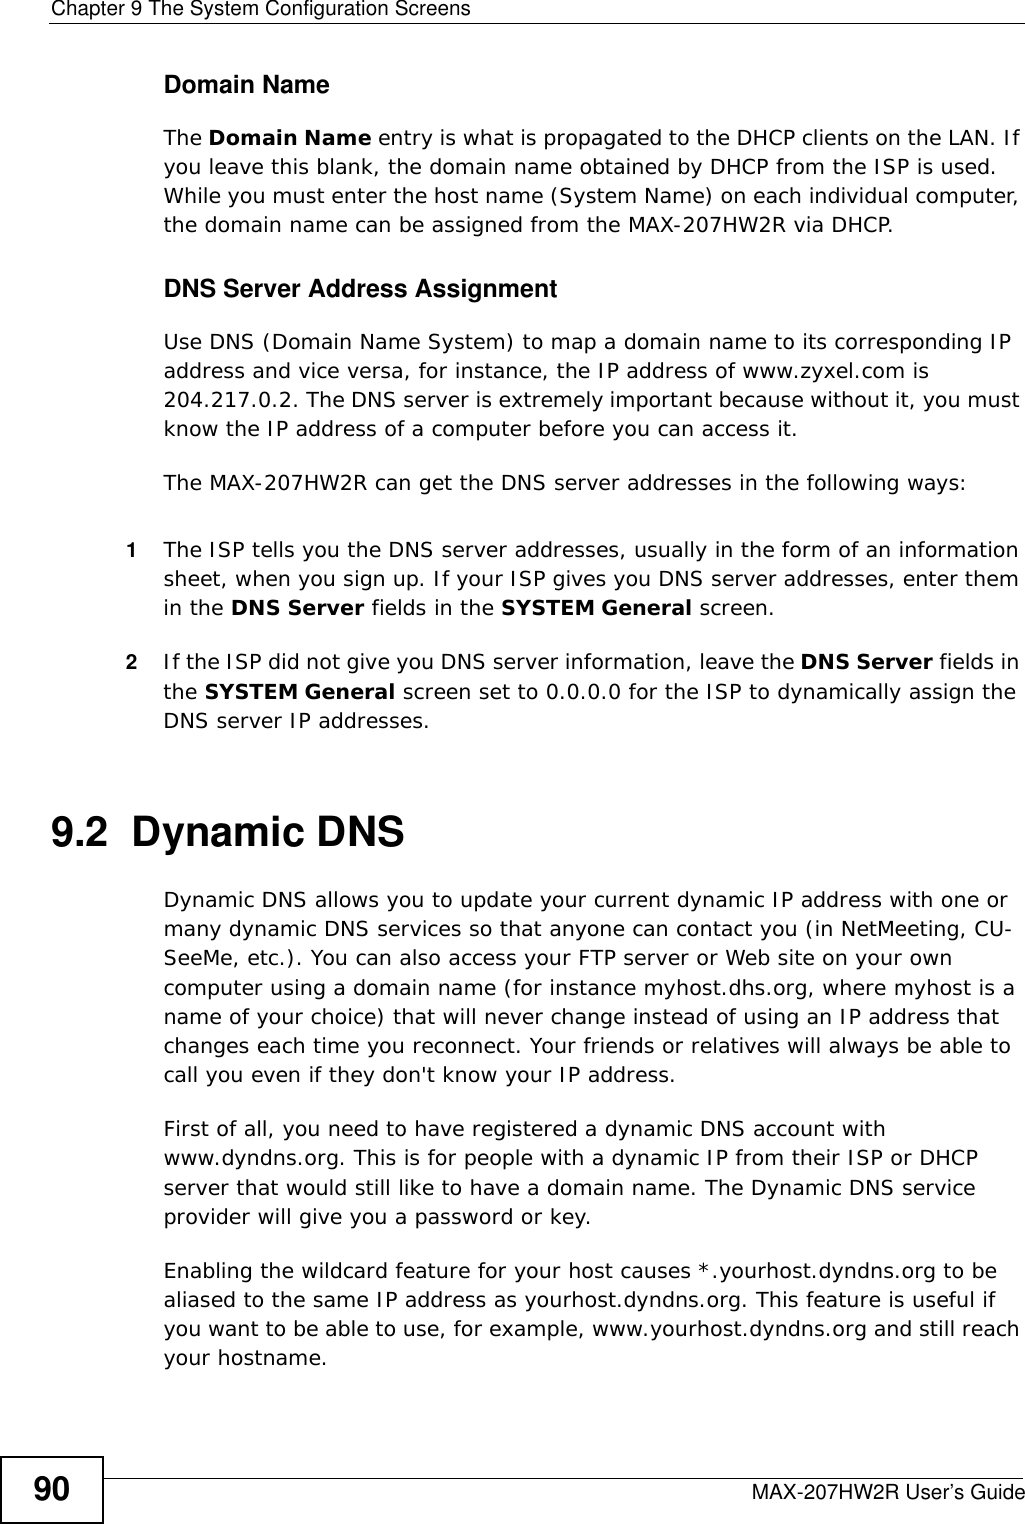 Chapter 9 The System Configuration ScreensMAX-207HW2R User’s Guide90Domain NameThe Domain Name entry is what is propagated to the DHCP clients on the LAN. If you leave this blank, the domain name obtained by DHCP from the ISP is used. While you must enter the host name (System Name) on each individual computer, the domain name can be assigned from the MAX-207HW2R via DHCP.DNS Server Address AssignmentUse DNS (Domain Name System) to map a domain name to its corresponding IP address and vice versa, for instance, the IP address of www.zyxel.com is 204.217.0.2. The DNS server is extremely important because without it, you must know the IP address of a computer before you can access it. The MAX-207HW2R can get the DNS server addresses in the following ways:1The ISP tells you the DNS server addresses, usually in the form of an information sheet, when you sign up. If your ISP gives you DNS server addresses, enter them in the DNS Server fields in the SYSTEM General screen.2If the ISP did not give you DNS server information, leave the DNS Server fields in the SYSTEM General screen set to 0.0.0.0 for the ISP to dynamically assign the DNS server IP addresses.9.2  Dynamic DNSDynamic DNS allows you to update your current dynamic IP address with one or many dynamic DNS services so that anyone can contact you (in NetMeeting, CU-SeeMe, etc.). You can also access your FTP server or Web site on your own computer using a domain name (for instance myhost.dhs.org, where myhost is a name of your choice) that will never change instead of using an IP address that changes each time you reconnect. Your friends or relatives will always be able to call you even if they don&apos;t know your IP address.First of all, you need to have registered a dynamic DNS account with www.dyndns.org. This is for people with a dynamic IP from their ISP or DHCP server that would still like to have a domain name. The Dynamic DNS service provider will give you a password or key.Enabling the wildcard feature for your host causes *.yourhost.dyndns.org to be aliased to the same IP address as yourhost.dyndns.org. This feature is useful if you want to be able to use, for example, www.yourhost.dyndns.org and still reach your hostname.